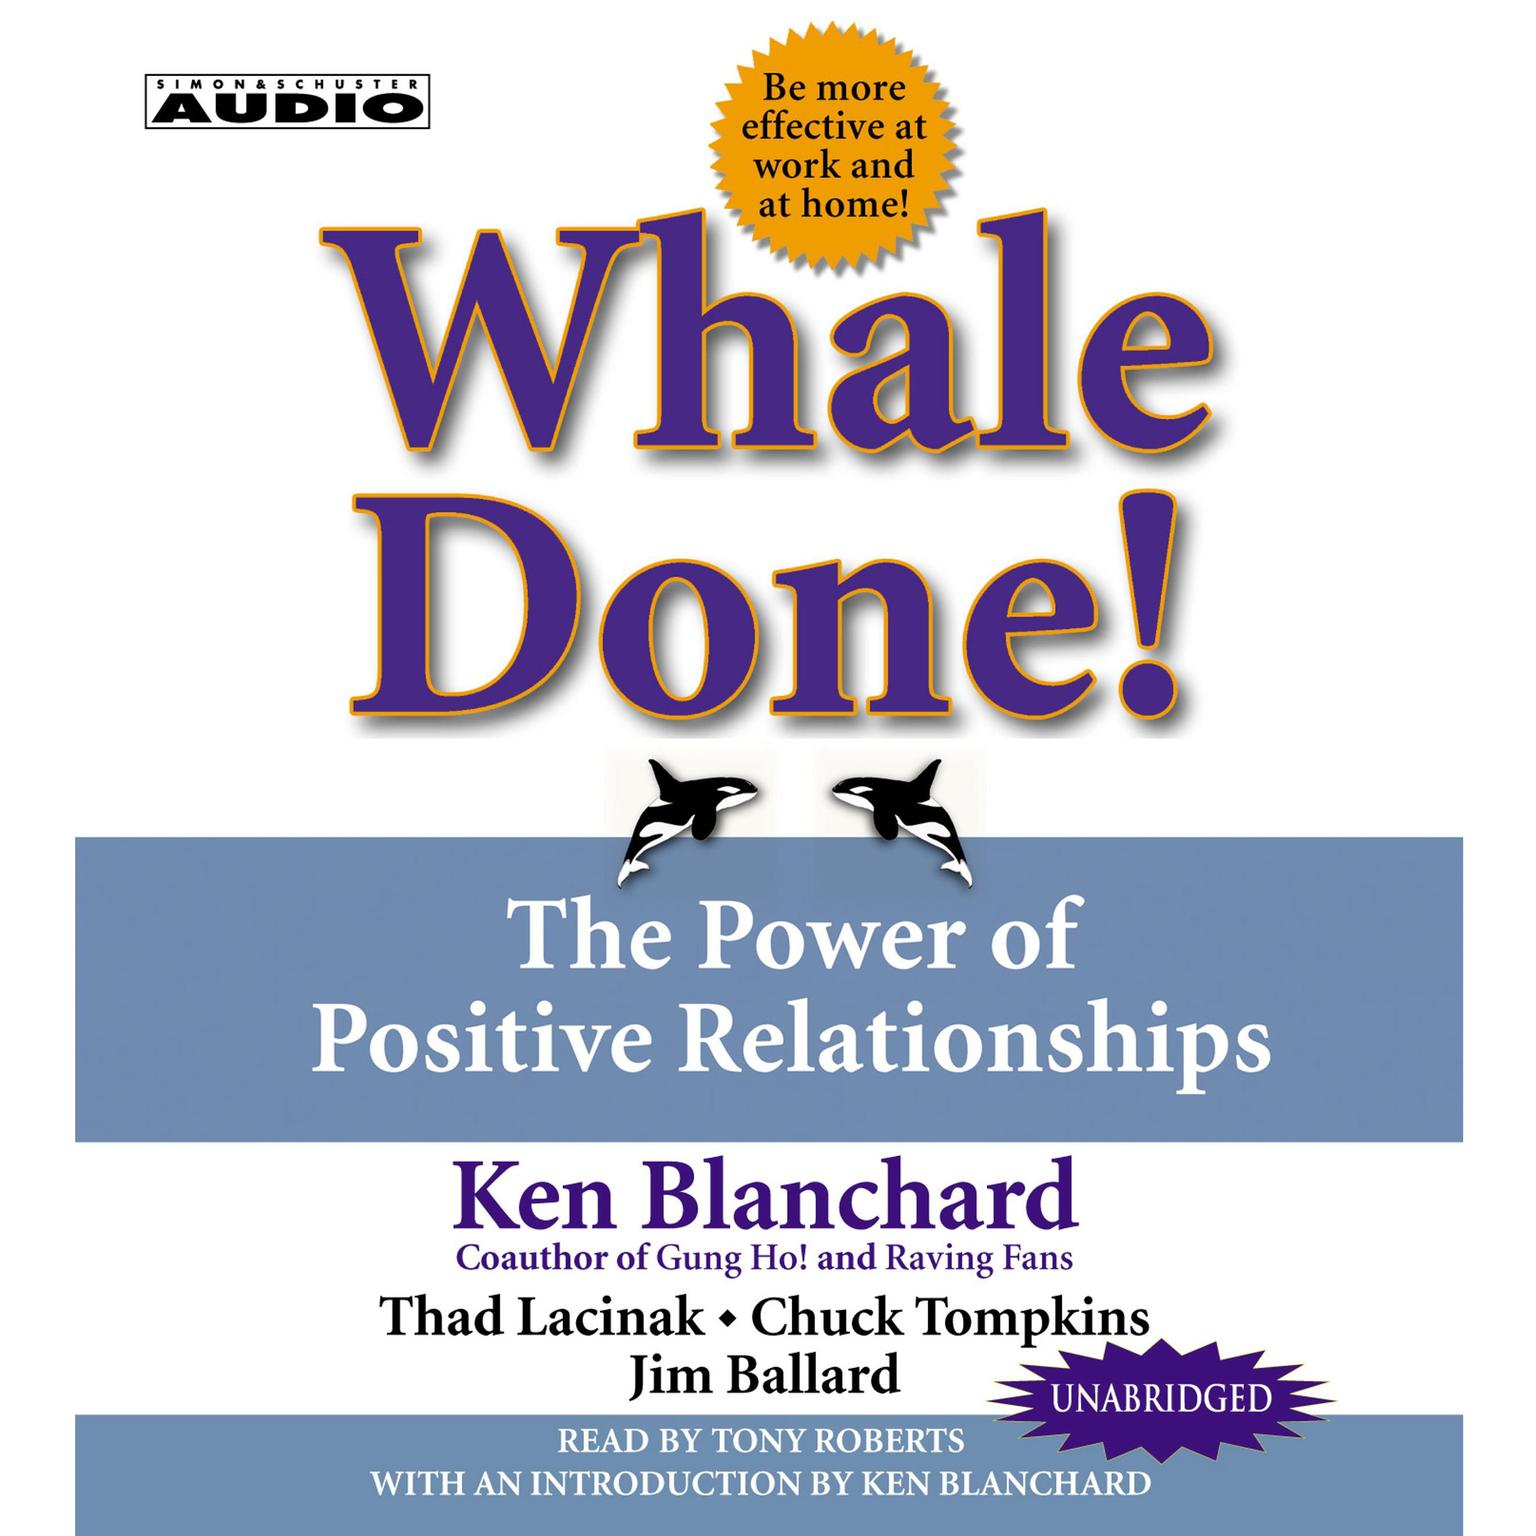 Whale Done!: The Power of Positive Relationships Audiobook, by Ken Blanchard